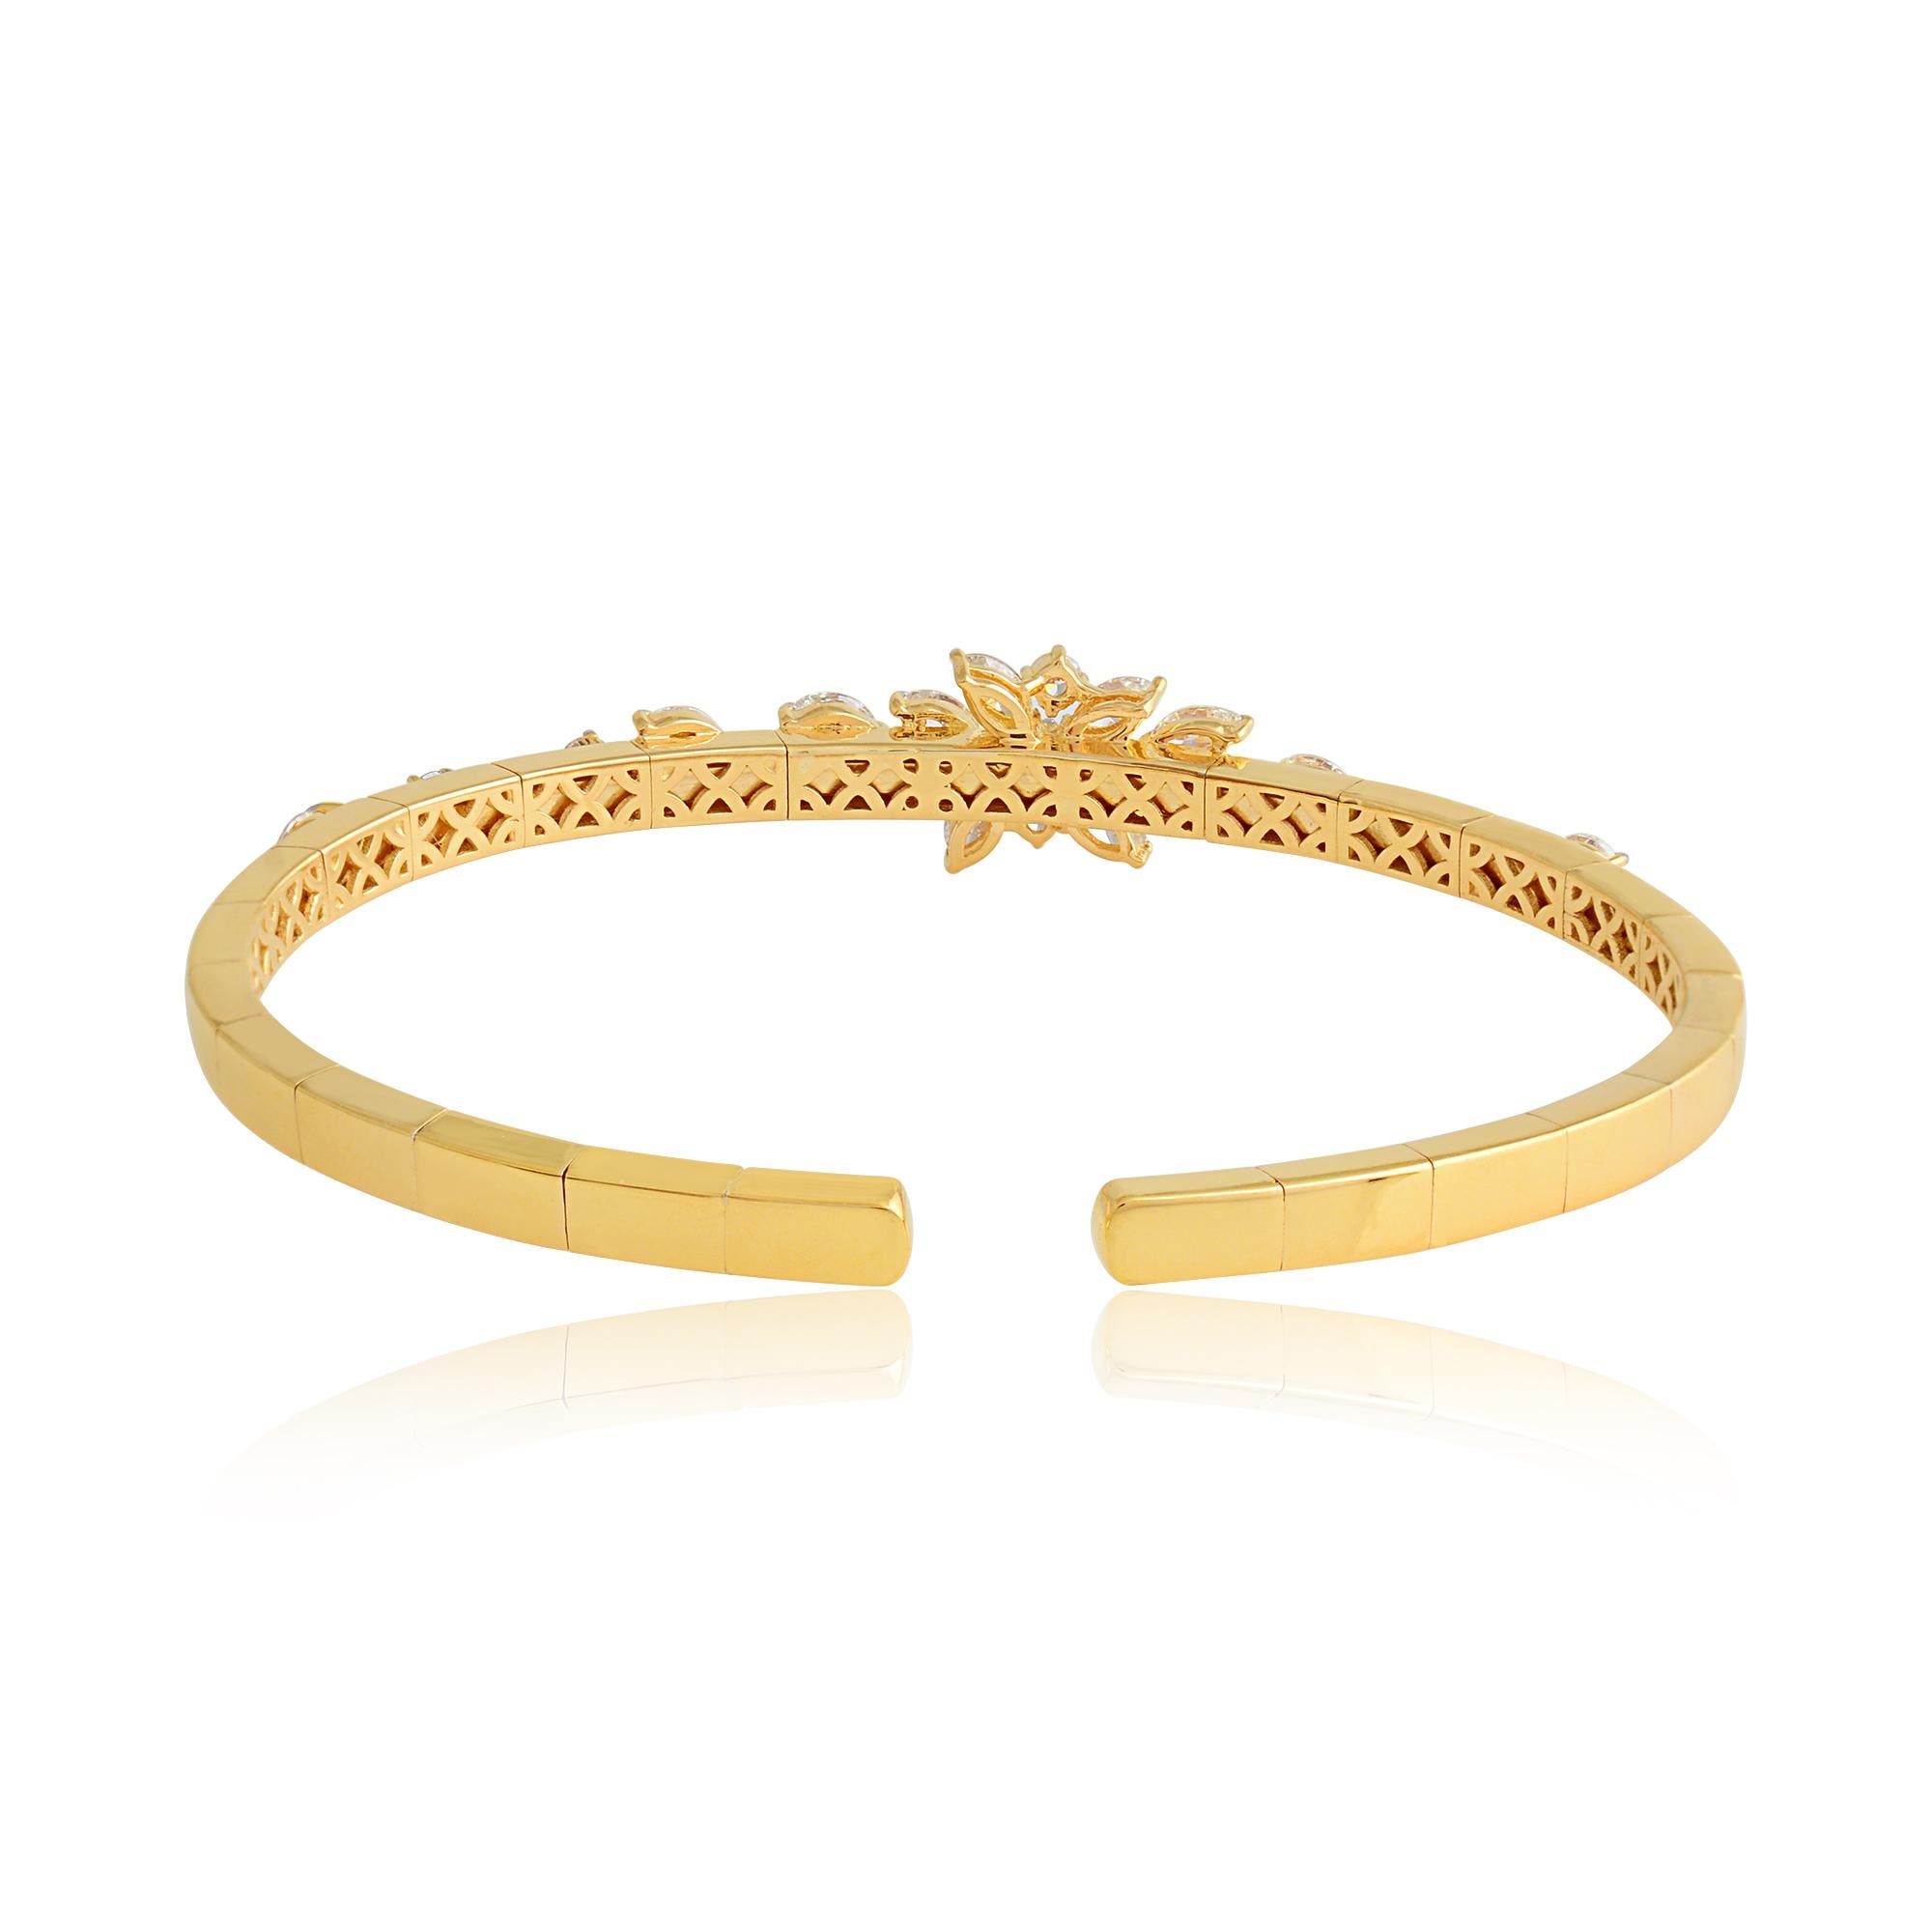 Crafted by skilled artisans, this bracelet is a true work of art, meticulously handcrafted to perfection. The 18 karat yellow gold setting provides the perfect backdrop for the dazzling diamonds, enhancing their brilliance and radiance with its warm